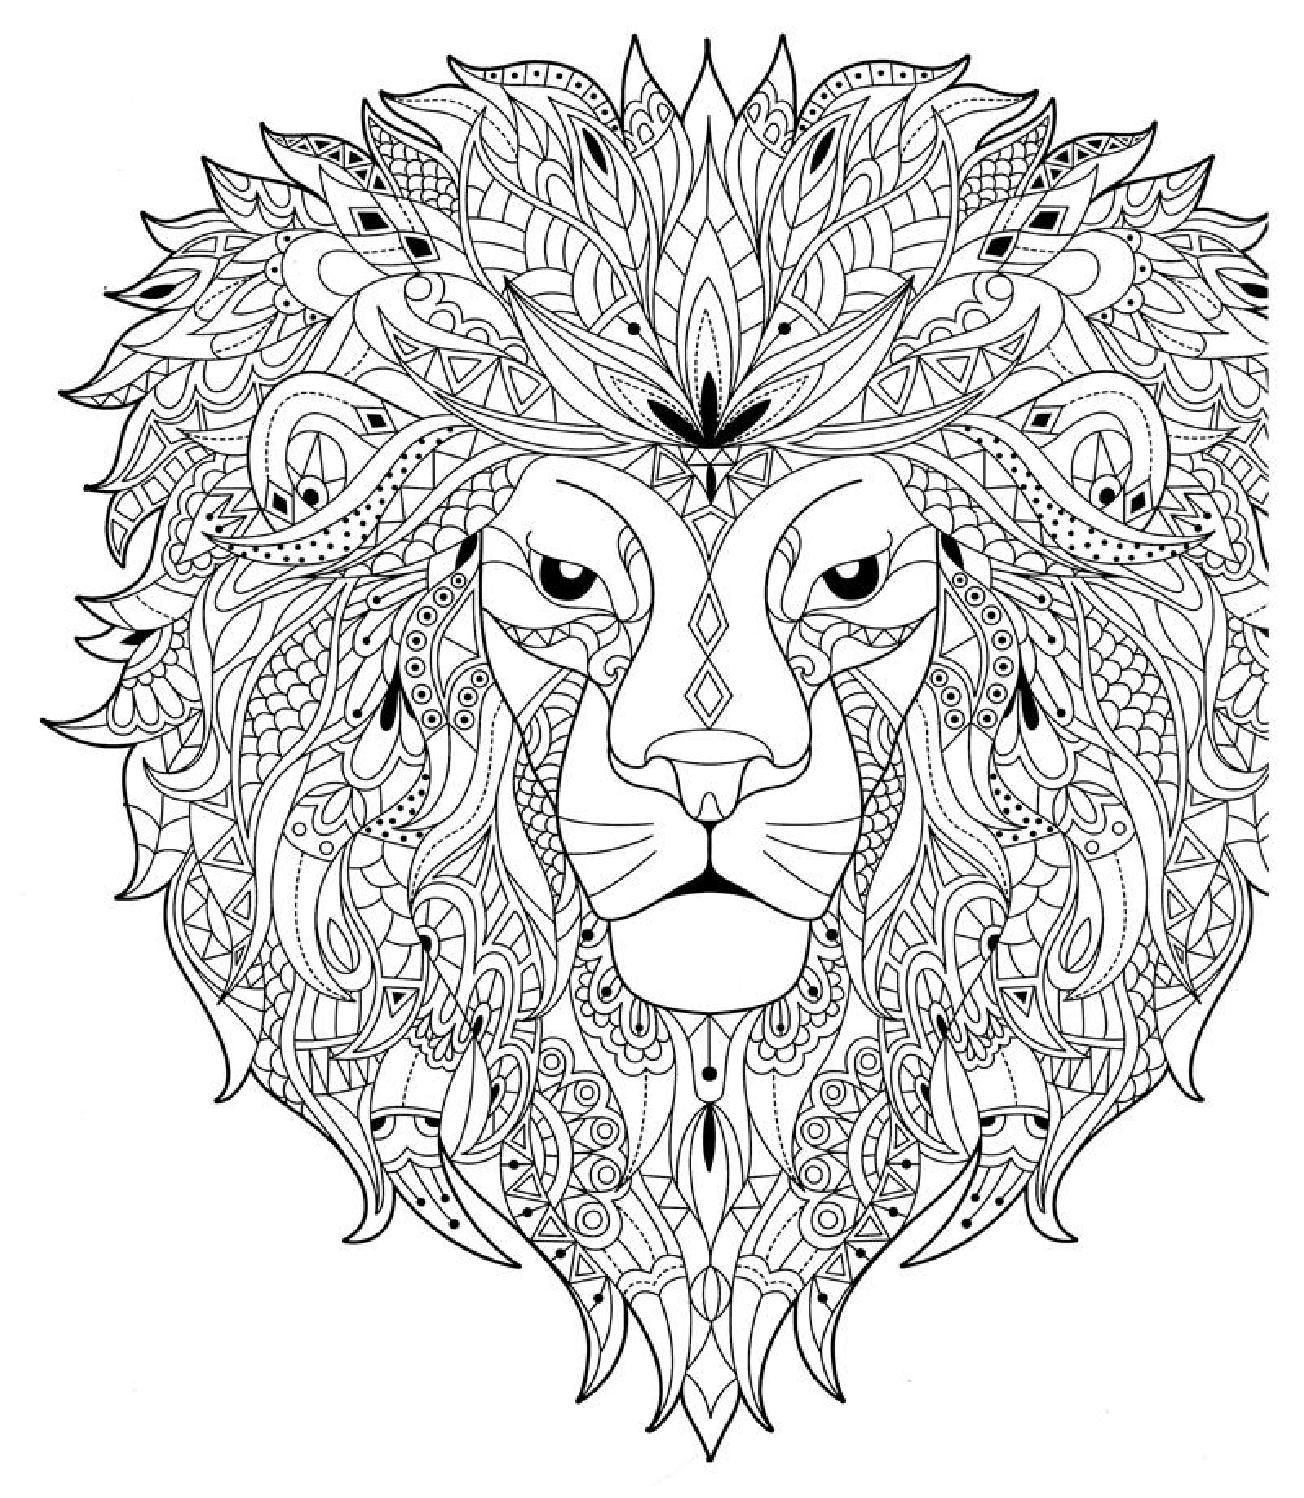 The 23 Best Ideas for Young Adult Coloring Pages - Home Inspiration and